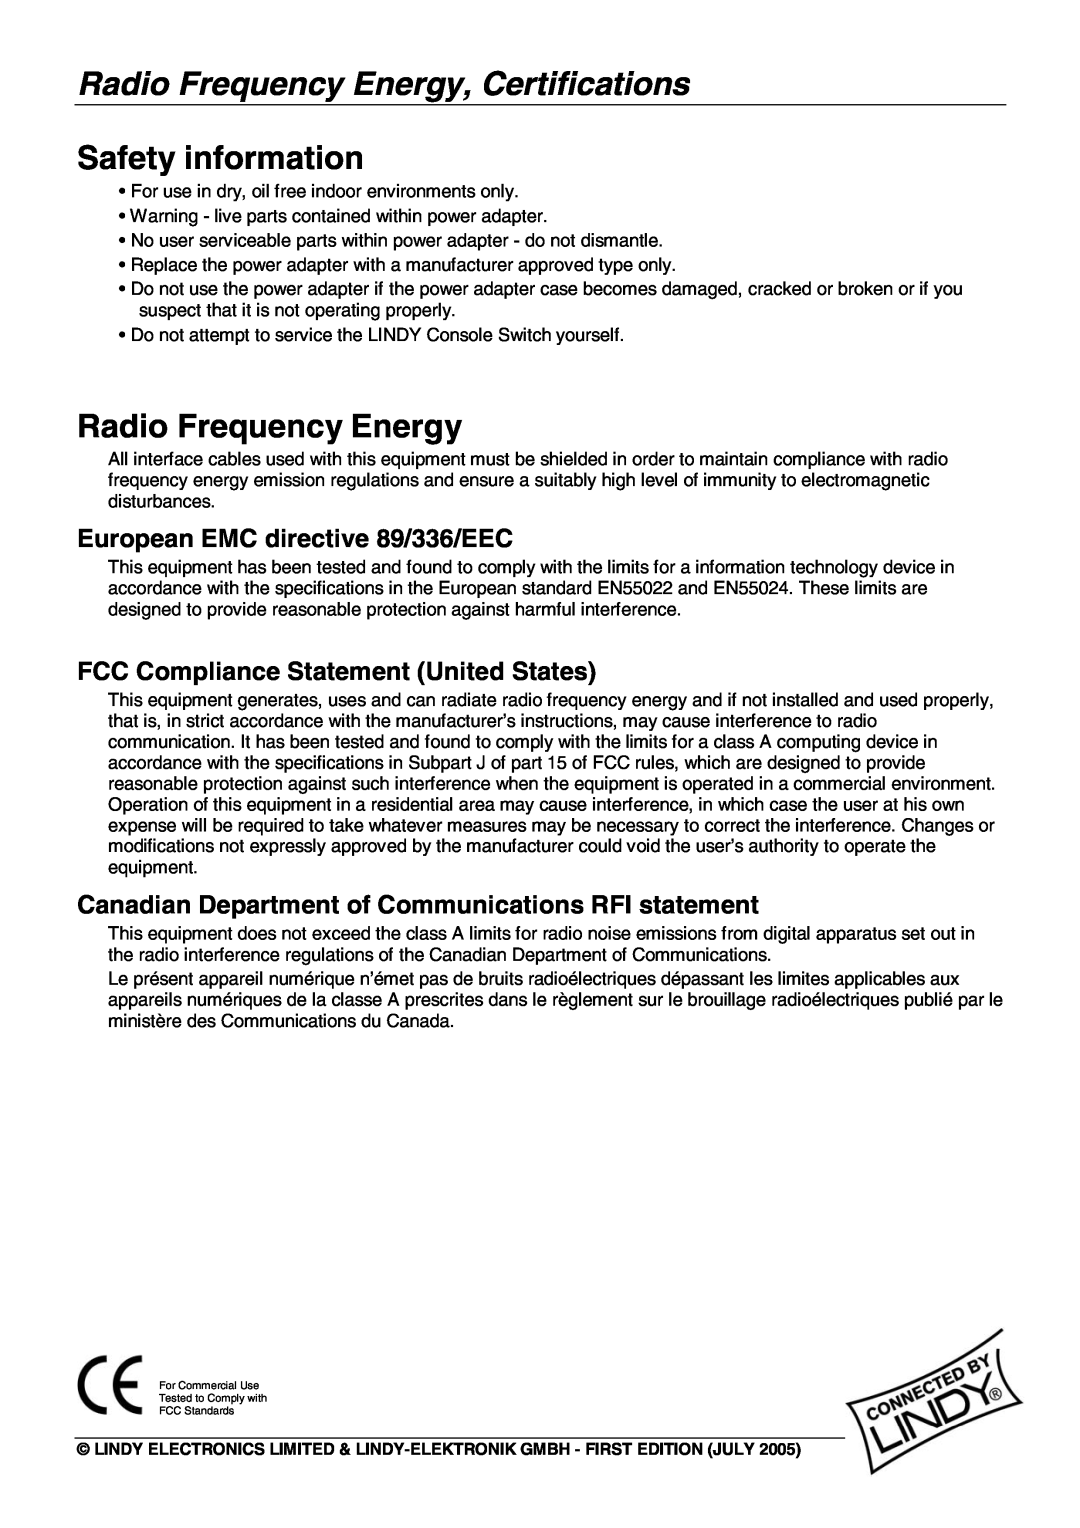 Lindy No. 39123 user manual Radio Frequency Energy, Certifications, Safety information, European EMC directive 89/336/EEC 